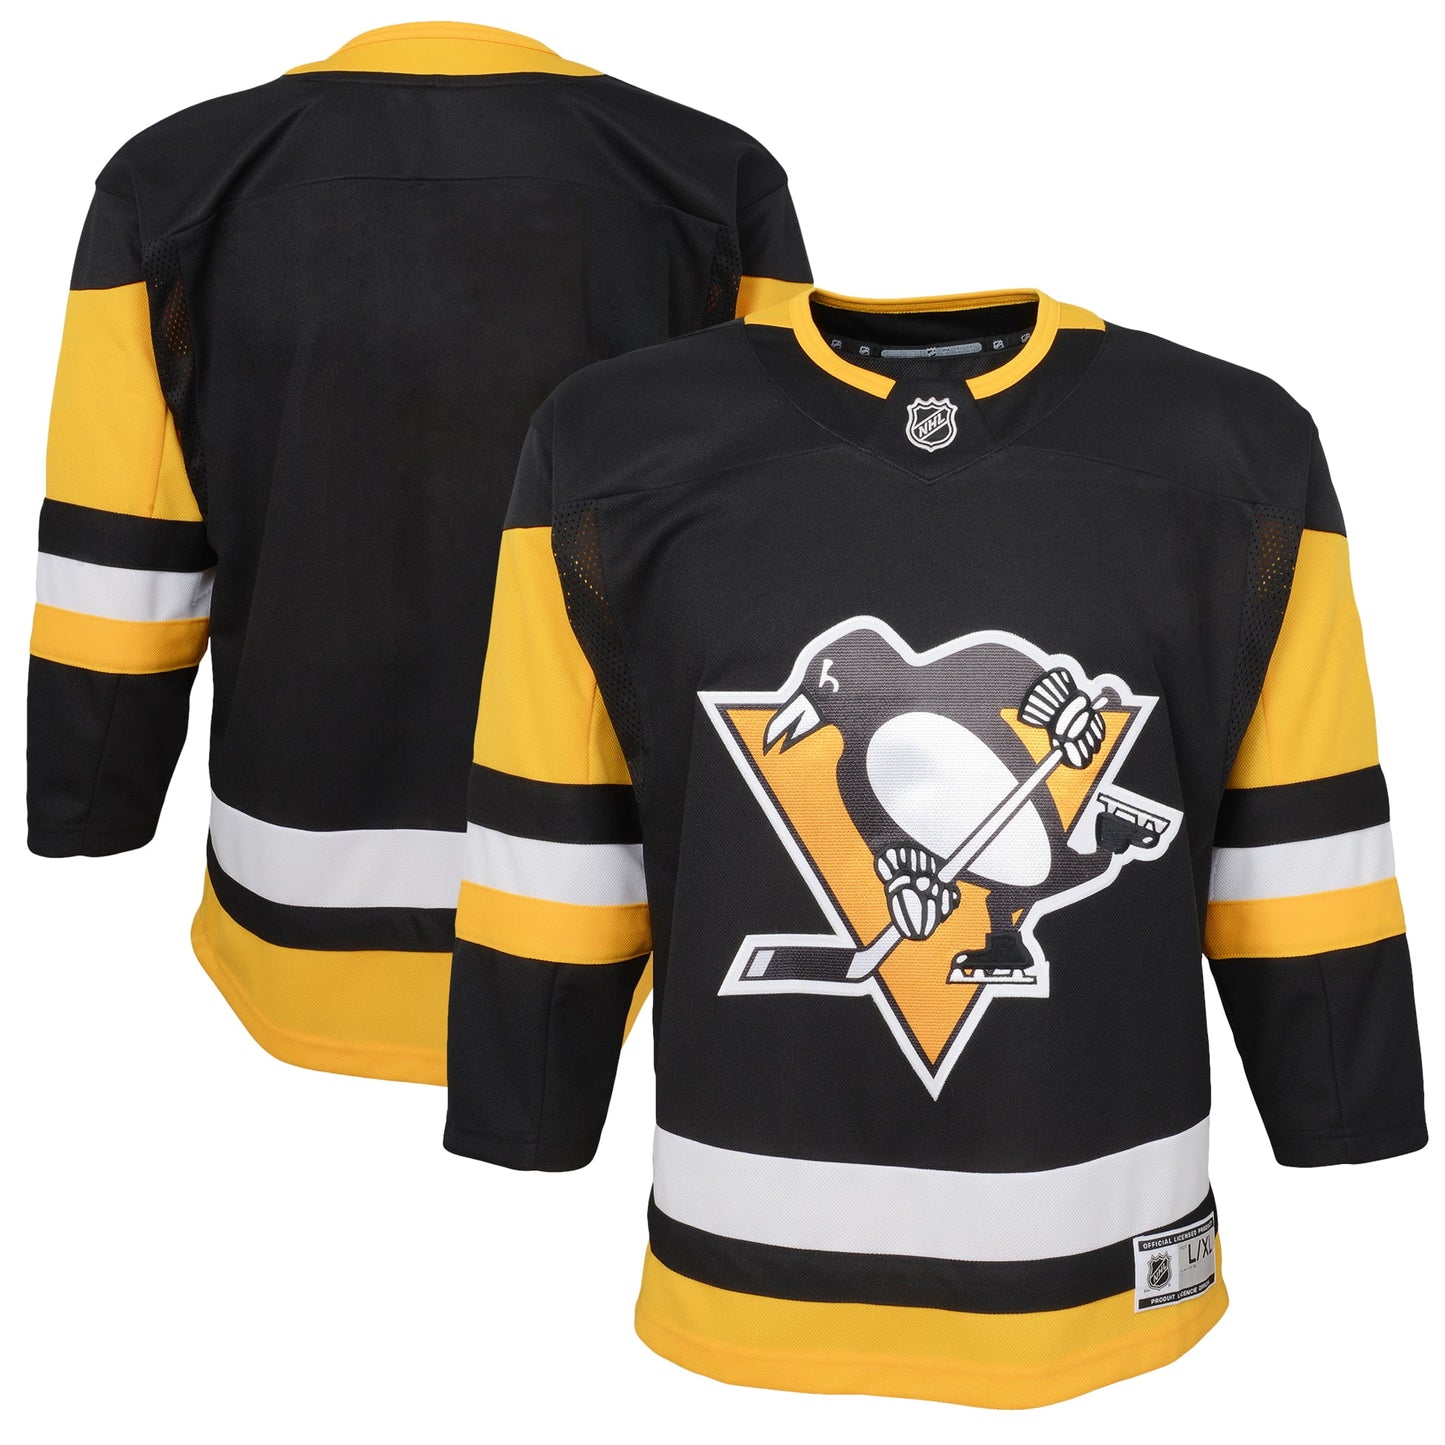 Youth Black Pittsburgh Penguins Home Premier Blank Jersey